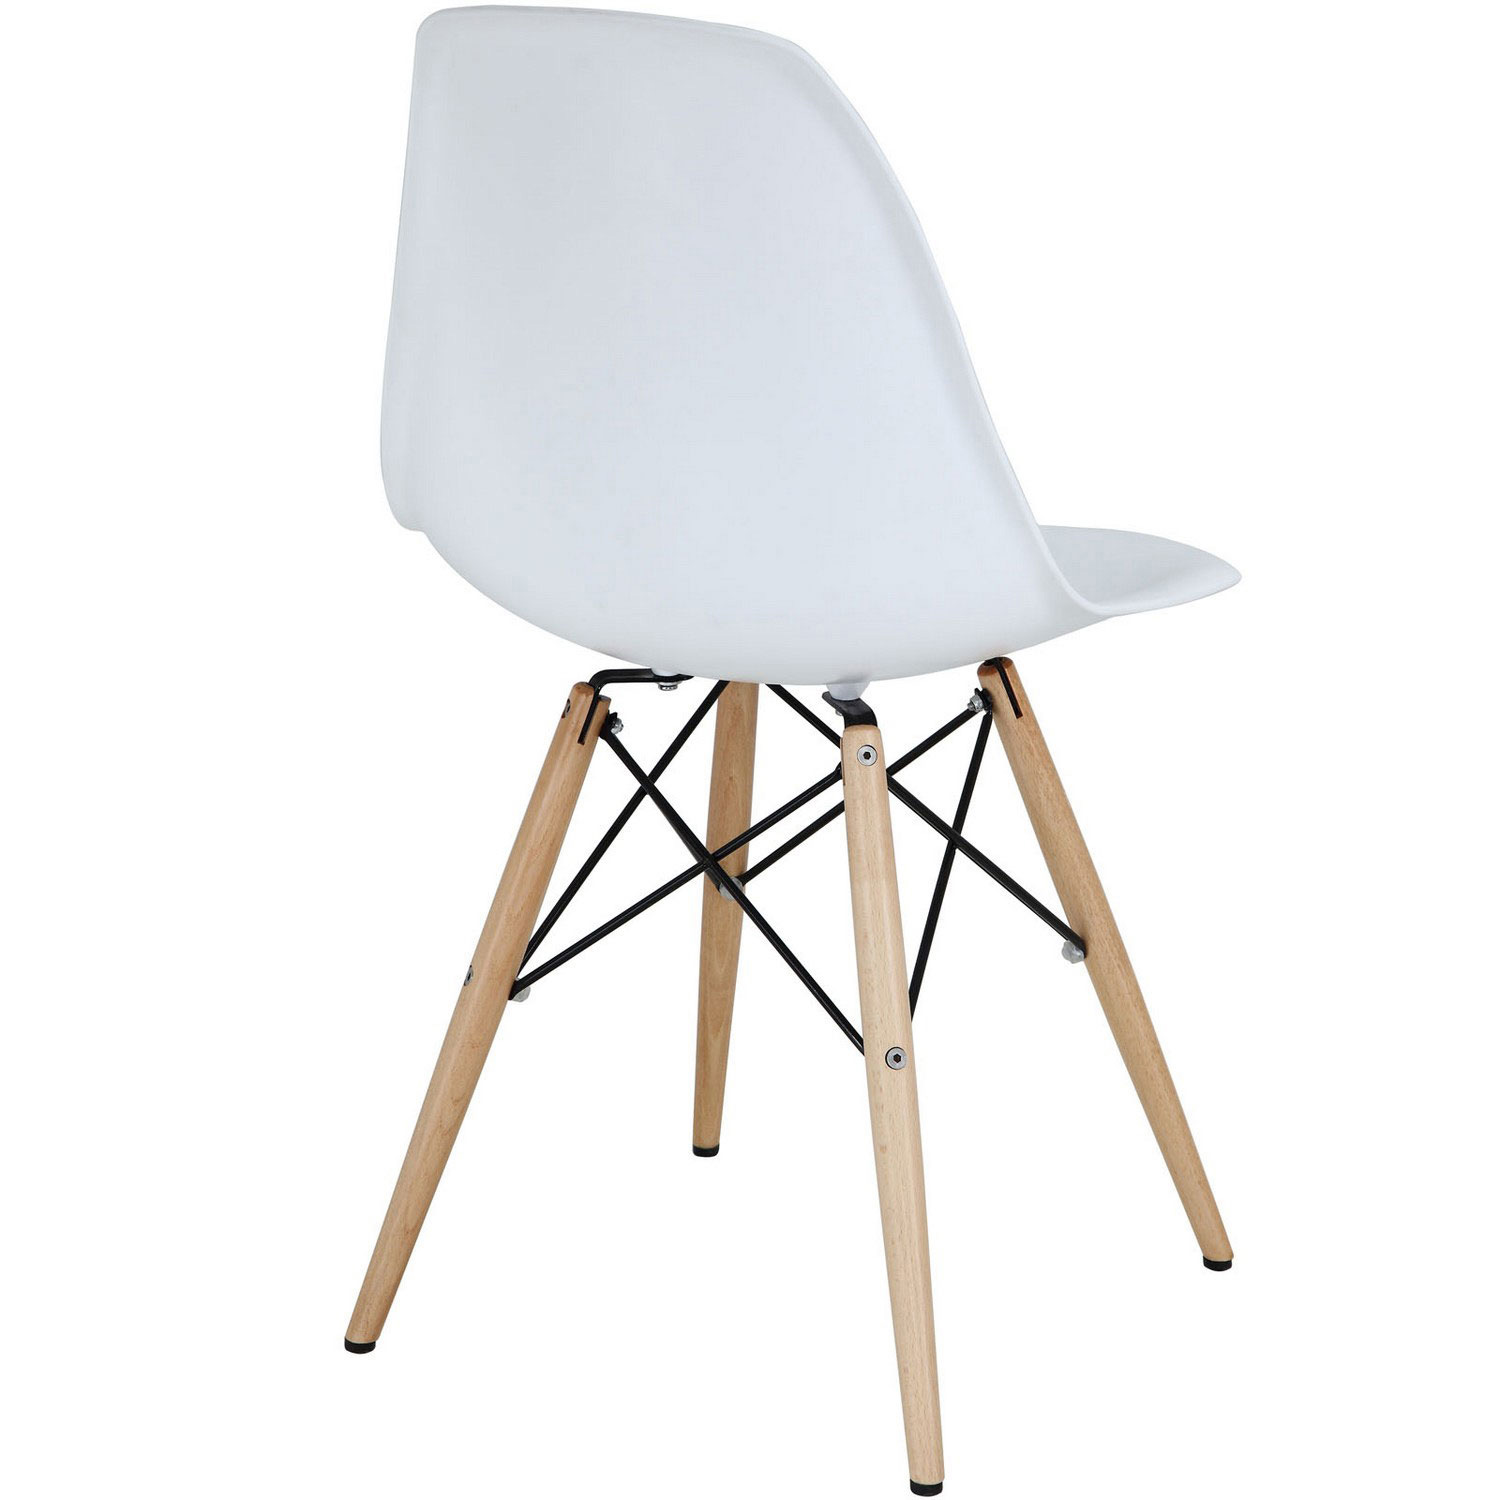 Modway Pyramid Dining Side Chairs Set of 2 - White